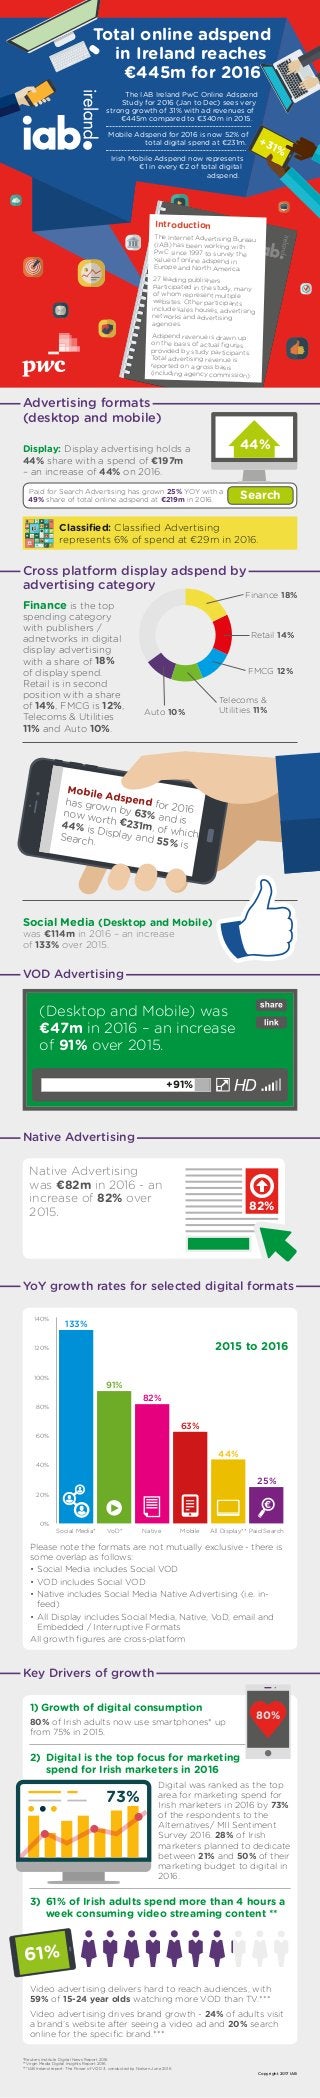 +31%
Total online adspend
in Ireland reaches
€445m for 2016
The IAB Ireland PwC Online Adspend
Study for 2016 (Jan to Dec) sees very
strong growth of 31% with ad revenues of
€445m compared to €340m in 2015.
Mobile Adspend for 2016 is now 52% of
total digital spend at €231m.
Irish Mobile Adspend now represents
€1 in every €2 of total digital
adspend.
Introduction
The Internet Advertising Bureau
(IAB) has been working with
PwC since 1997 to survey the
value of online adspend in
Europe and North America.
27 leading publishers
participated in the study, many
of whom represent multiple
websites. Other participants
include sales houses, advertising
networks and advertising
agencies.
Adspend revenue is drawn up
on the basis of actual figures
provided by study participants.
Total advertising revenue is
reported on a gross basis
(including agency commission).
Advertising formats
(desktop and mobile)
Classified: Classified Advertising
represents 6% of spend at €29m in 2016.
Display: Display advertising holds a
44% share with a spend of €197m
– an increase of 44% on 2016.
Copyright 2017 IAB
*Reuters Institute Digital News Report 2016
**Virgin Media Digital Insights Report 2016
***IAB Ireland report: The Power of VOD 3, conducted by Nielsen June 2016
Paid for Search Advertising has grown 25% YOY with a
49% share of total online adspend at €219m in 2016. Search
Native Advertising
Native Advertising
was €82m in 2016 - an
increase of 82% over
2015.
82%
+91%
(Desktop and Mobile) was
€47m in 2016 – an increase
of 91% over 2015.
Mobile Adspend for 2016
has grown by 63% and is
now worth €231m, of which
44% is Display and 55% is
Search.
VOD Advertising
Social Media (Desktop and Mobile)
was €114m in 2016 – an increase
of 133% over 2015.
44%
Key Drivers of growth
1)	Growth of digital consumption
80% of Irish adults now use smartphones* up
from 75% in 2015.
2)	 Digital is the top focus for marketing
spend for Irish marketers in 2016
Digital was ranked as the top
area for marketing spend for
Irish marketers in 2016 by 73%
of the respondents to the
Alternatives/ MII Sentiment
Survey 2016. 28% of Irish
marketers planned to dedicate
between 21% and 50% of their
marketing budget to digital in
2016.
3)	 61% of Irish adults spend more than 4 hours a
week consuming video streaming content **
Video advertising delivers hard to reach audiences, with
59% of 15-24 year olds watching more VOD than TV.***
Video advertising drives brand growth - 24% of adults visit
a brand’s website after seeing a video ad and 20% search
online for the specific brand.***
80%
73%
61%
YoY growth rates for selected digital formats
Please note the formats are not mutually exclusive - there is
some overlap as follows:
•	Social Media includes Social VOD
•	VOD includes Social VOD
•	Native includes Social Media Native Advertising (i.e. in-
feed)
•	All Display includes Social Media, Native, VoD, email and
Embedded / Interruptive Formats
All growth figures are cross-platform
0%
20%
40%
60%
80%
100%
120%
140%
Mobile
63%
82%
Social Media*
133%
VoD* Native
91%
All Display**
44%
Paid Search
25%
2015 to 2016
Cross platform display adspend by
advertising category
Finance 18%
Retail 14%
FMCG 12%
Telecoms &
Utilities 11%Auto 10%
Finance is the top
spending category
with publishers /
adnetworks in digital
display advertising
with a share of 18%
of display spend.
Retail is in second
position with a share
of 14%, FMCG is 12%,
Telecoms & Utilities
11% and Auto 10%.
 